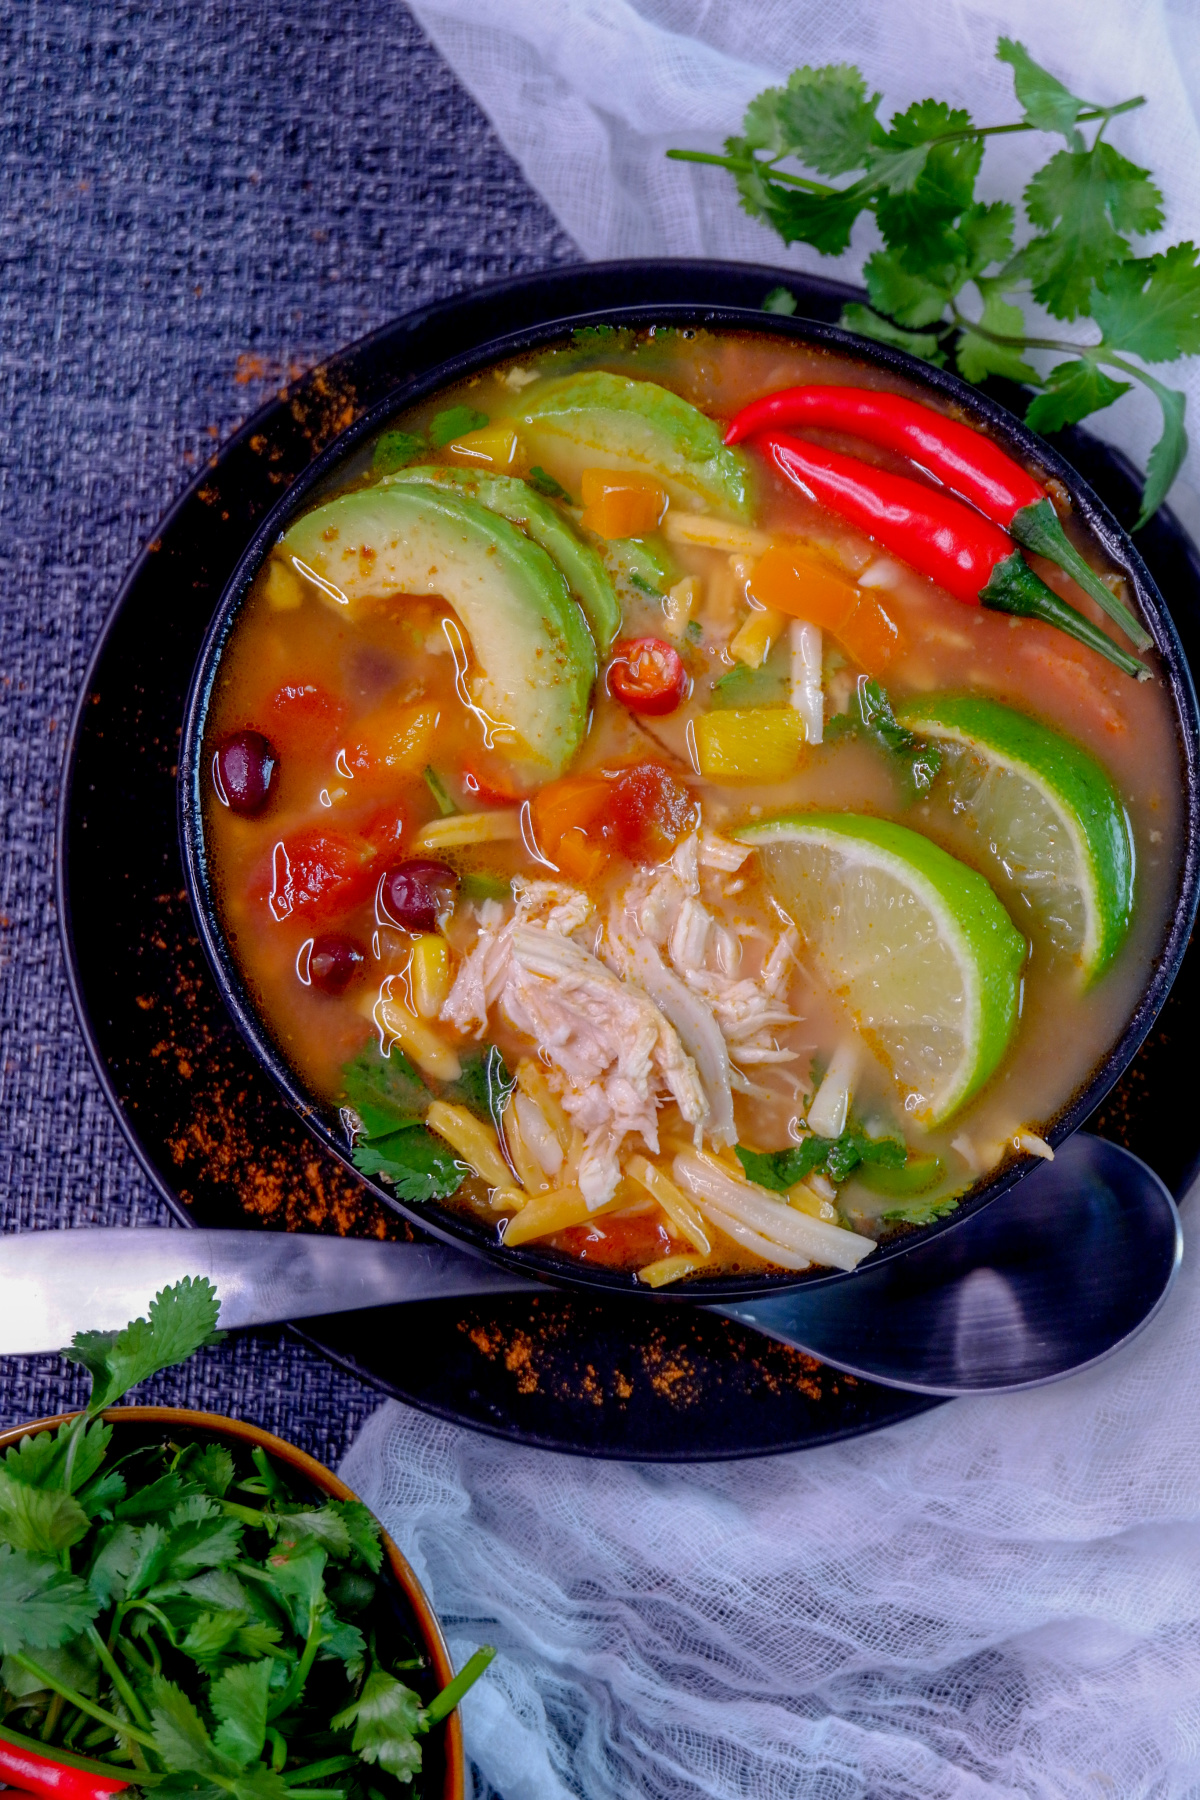 This Instant Pot Chicken Tortilla Soup is a perfect comfort food meal that comes together in minutes using your electric pressure cooker with amazing authentic flavours!